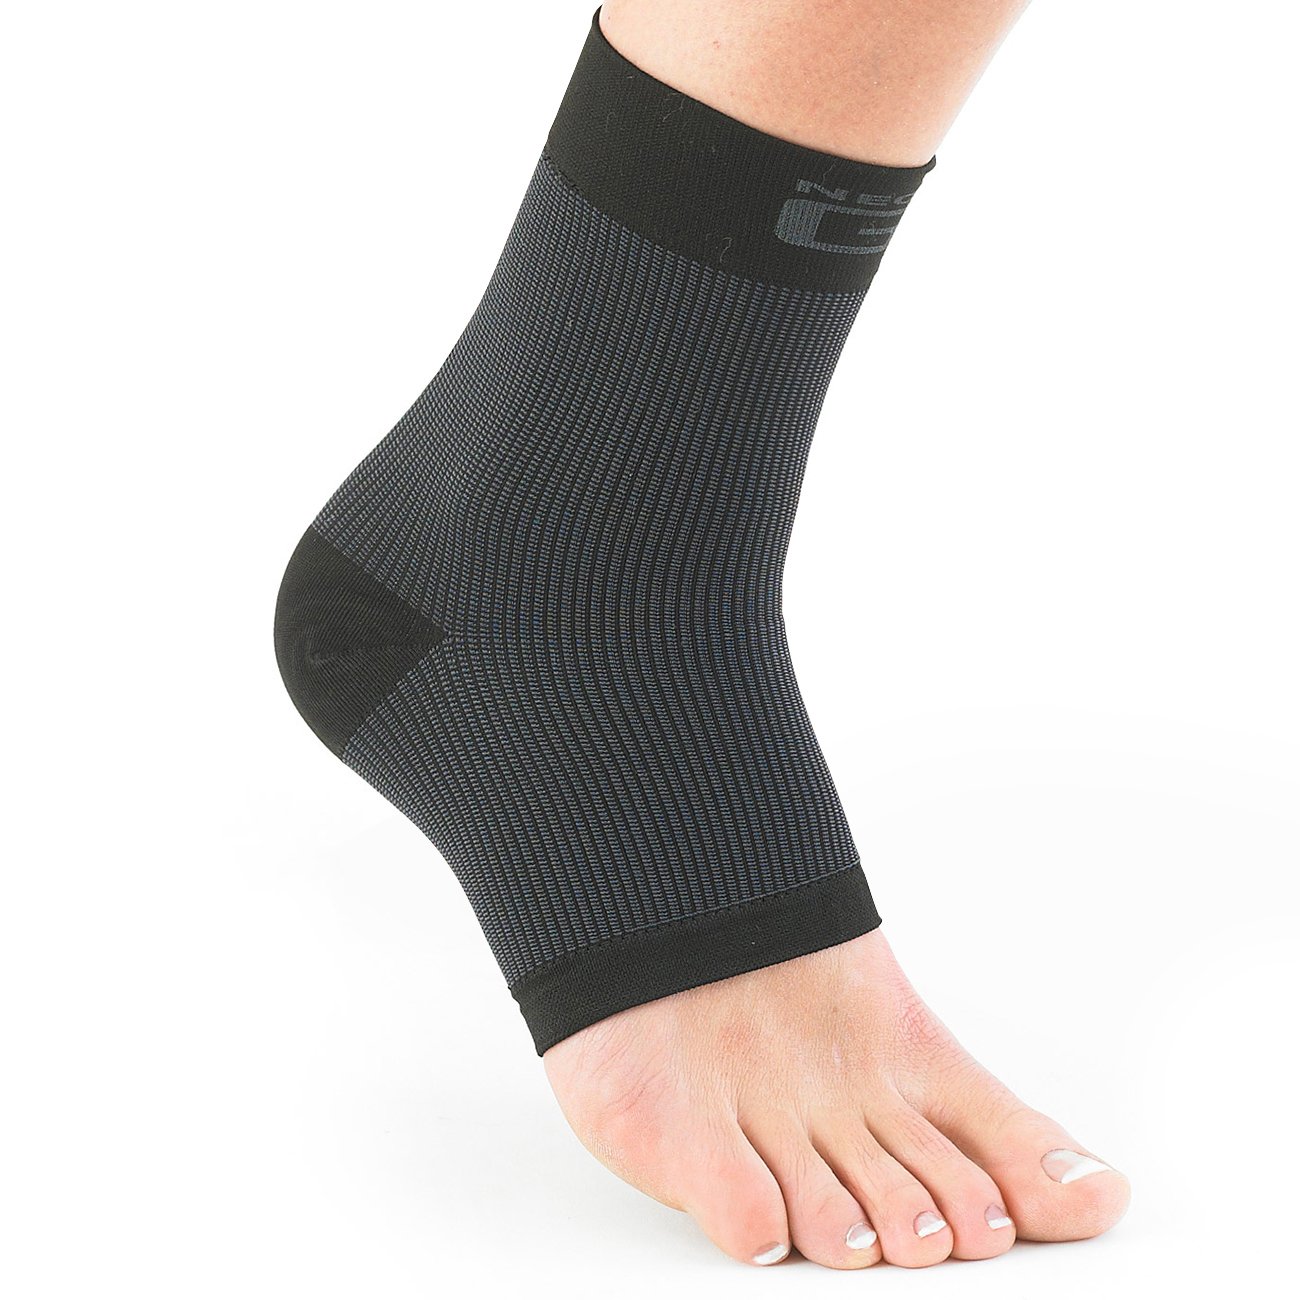 Neo G Airflow Ankle Support - Small